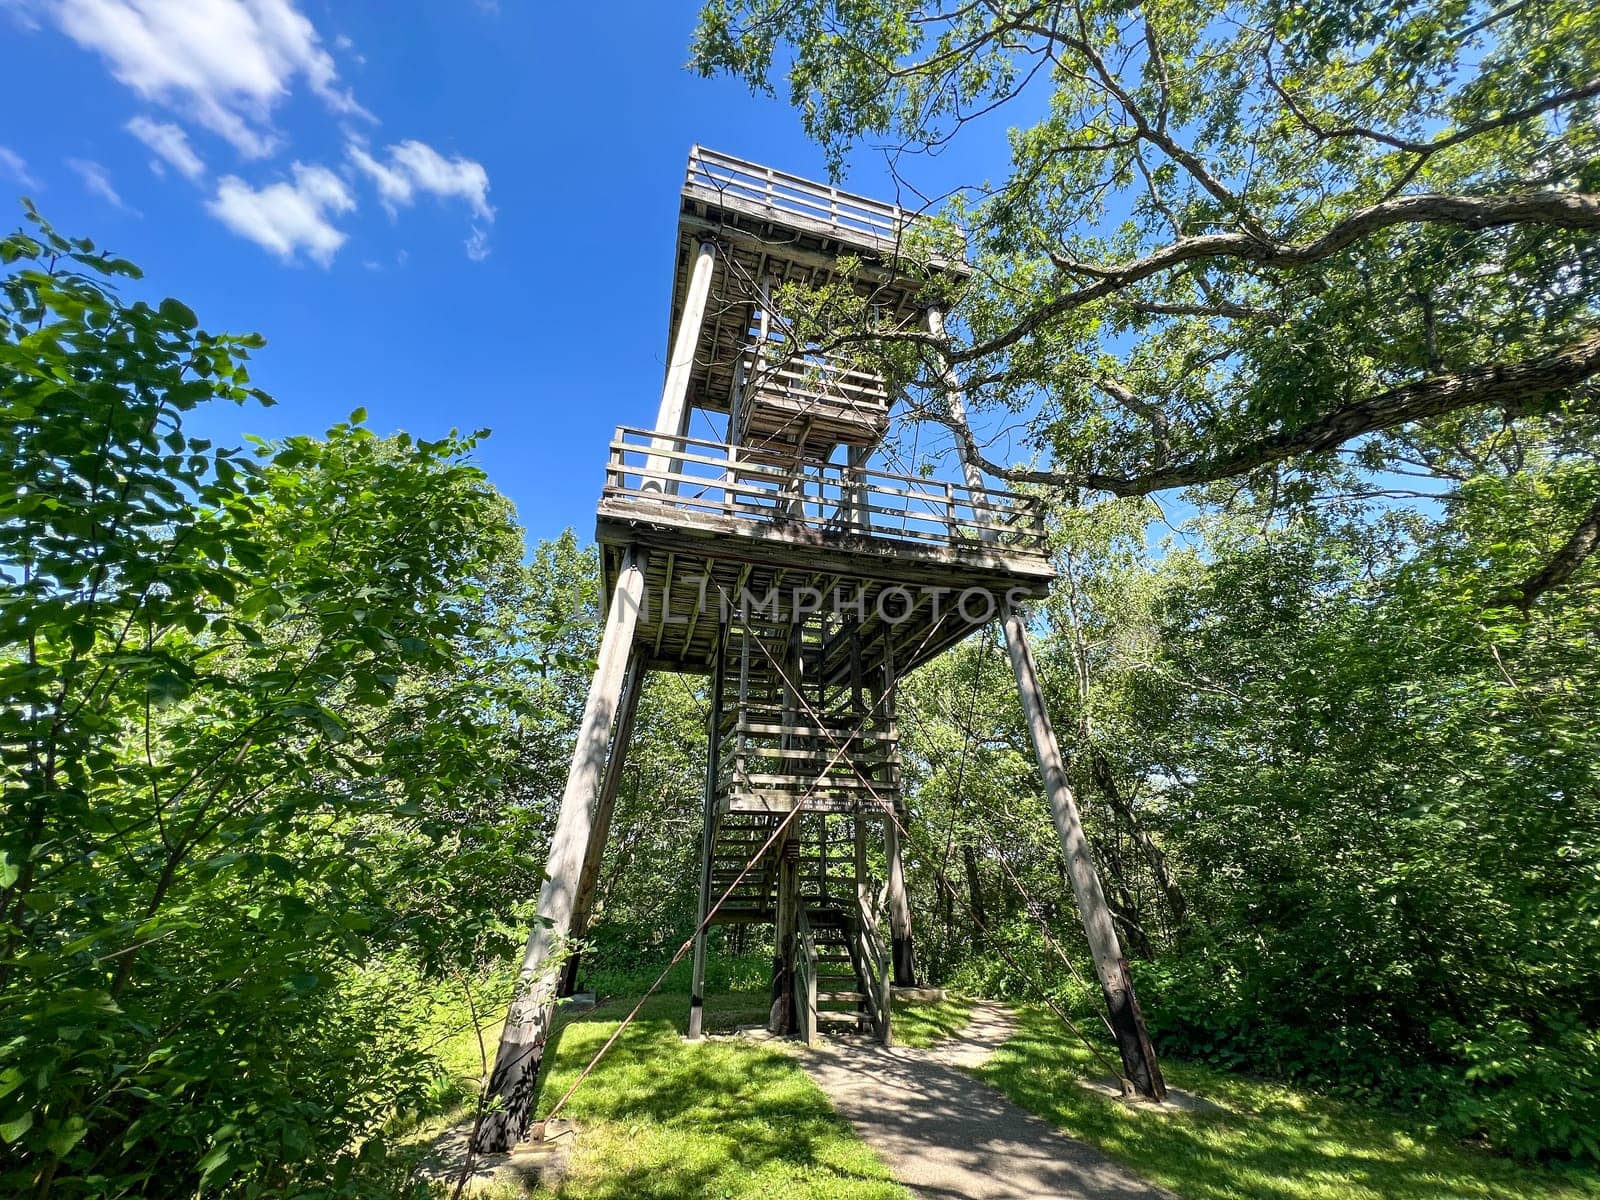 Blue mounts state park viewing tower in the middle of the forest by WeWander